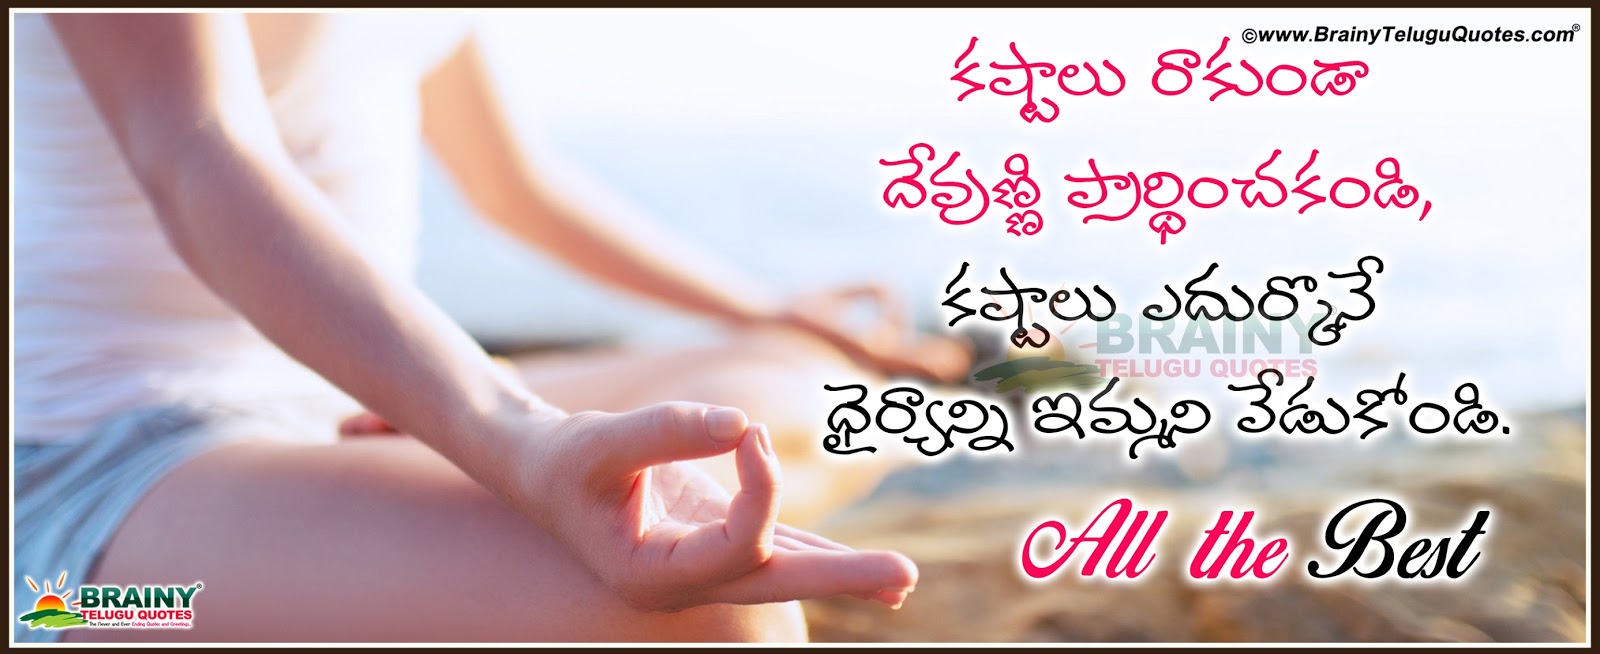 Beautiful Telugu All the best Inspirational Life Quotes with images for whatsapp Best